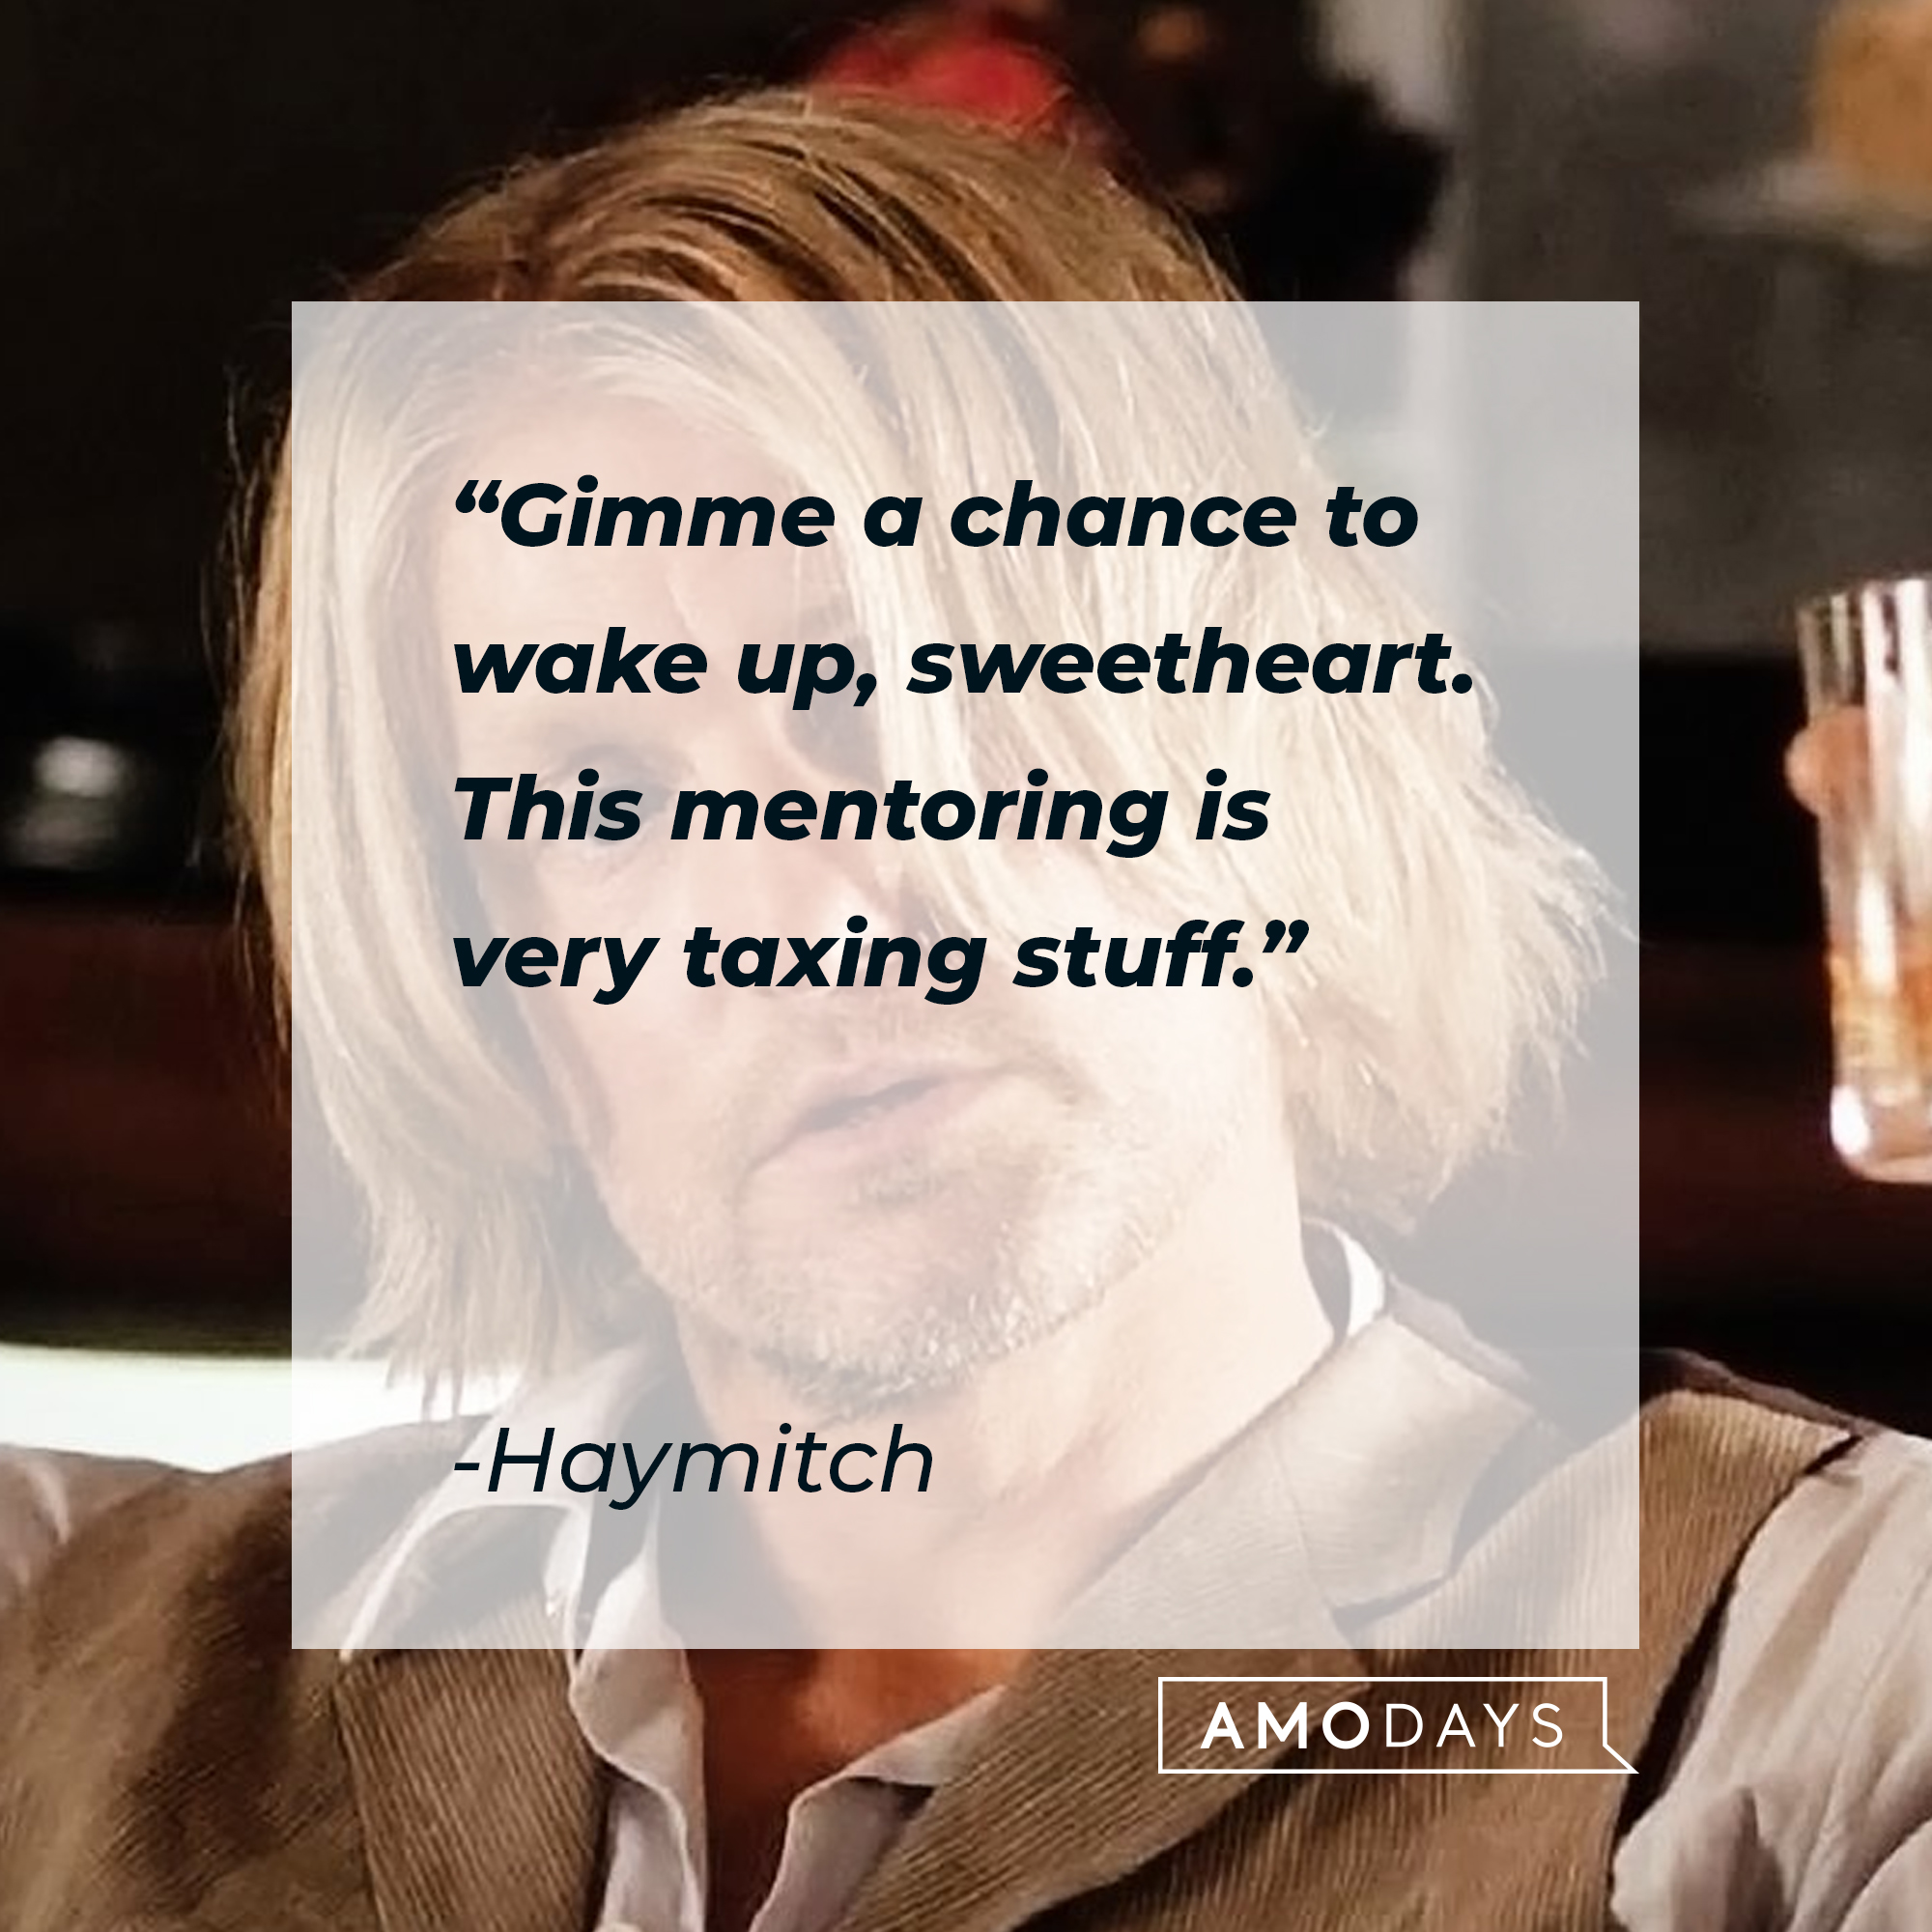 Haymitch's quote: "Gimme a chance to wake up, sweetheart. This mentoring is very taxing stuff." | Source: facebook.com/TheHungerGamesMovie